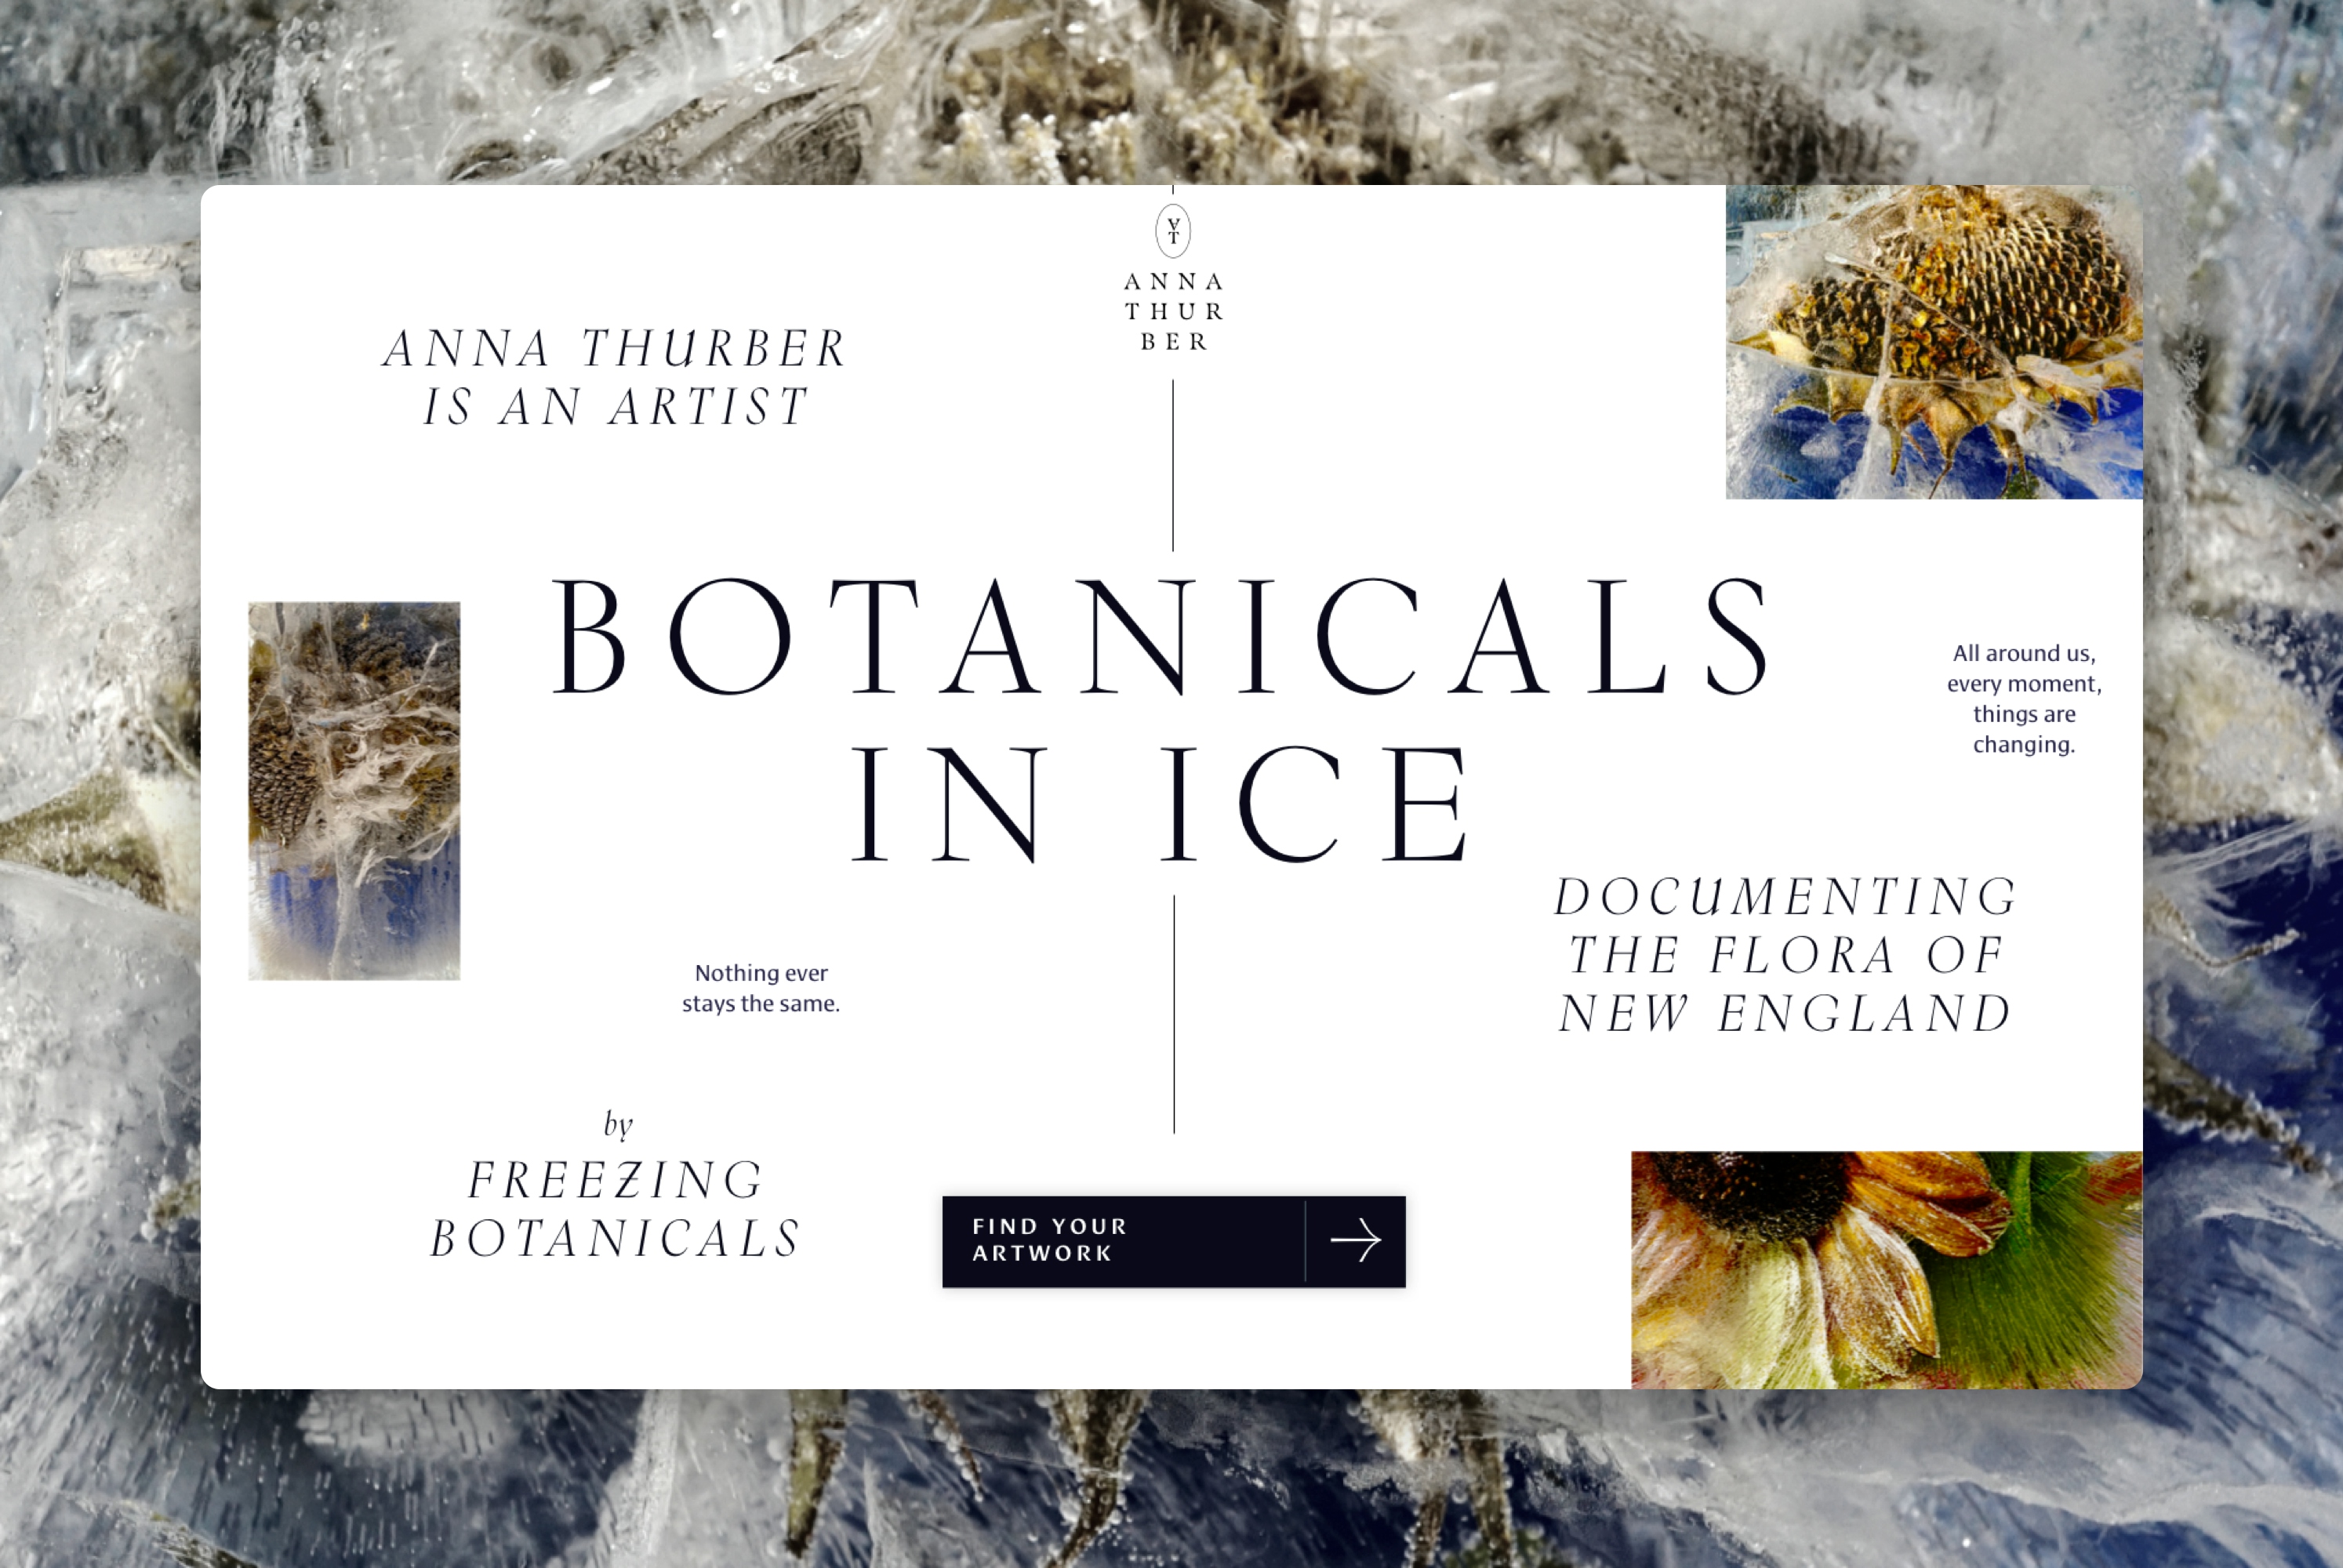 “Botanicals In ice” page with subtext “by Freezing Botanicals” and an explanation “documenting the flora of New England”